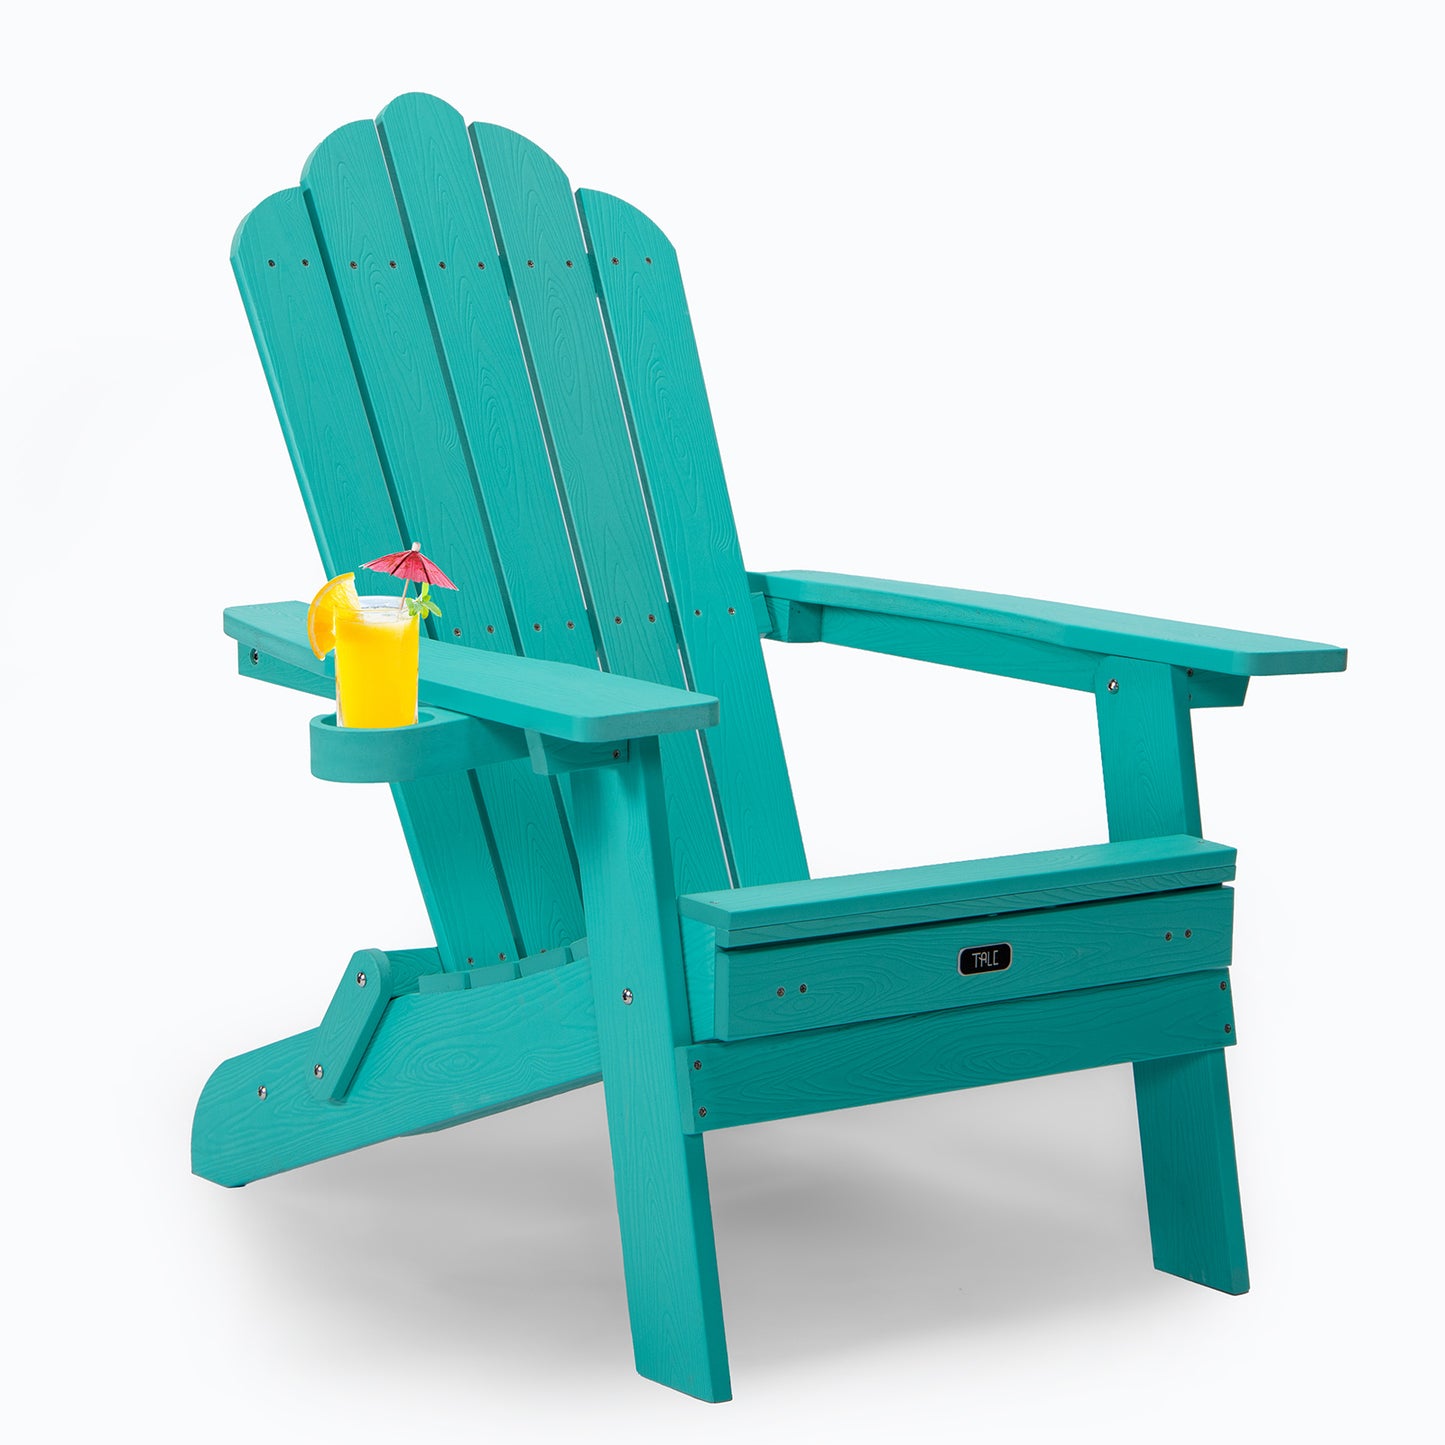 TALE Folding Adirondack Chair with Pullout Ottoman with Cup Holder; Oaversized; Poly Lumber; for Patio Deck Garden; Backyard Furniture; Easy to Install; . GREEN.Banned from selling on Amazon